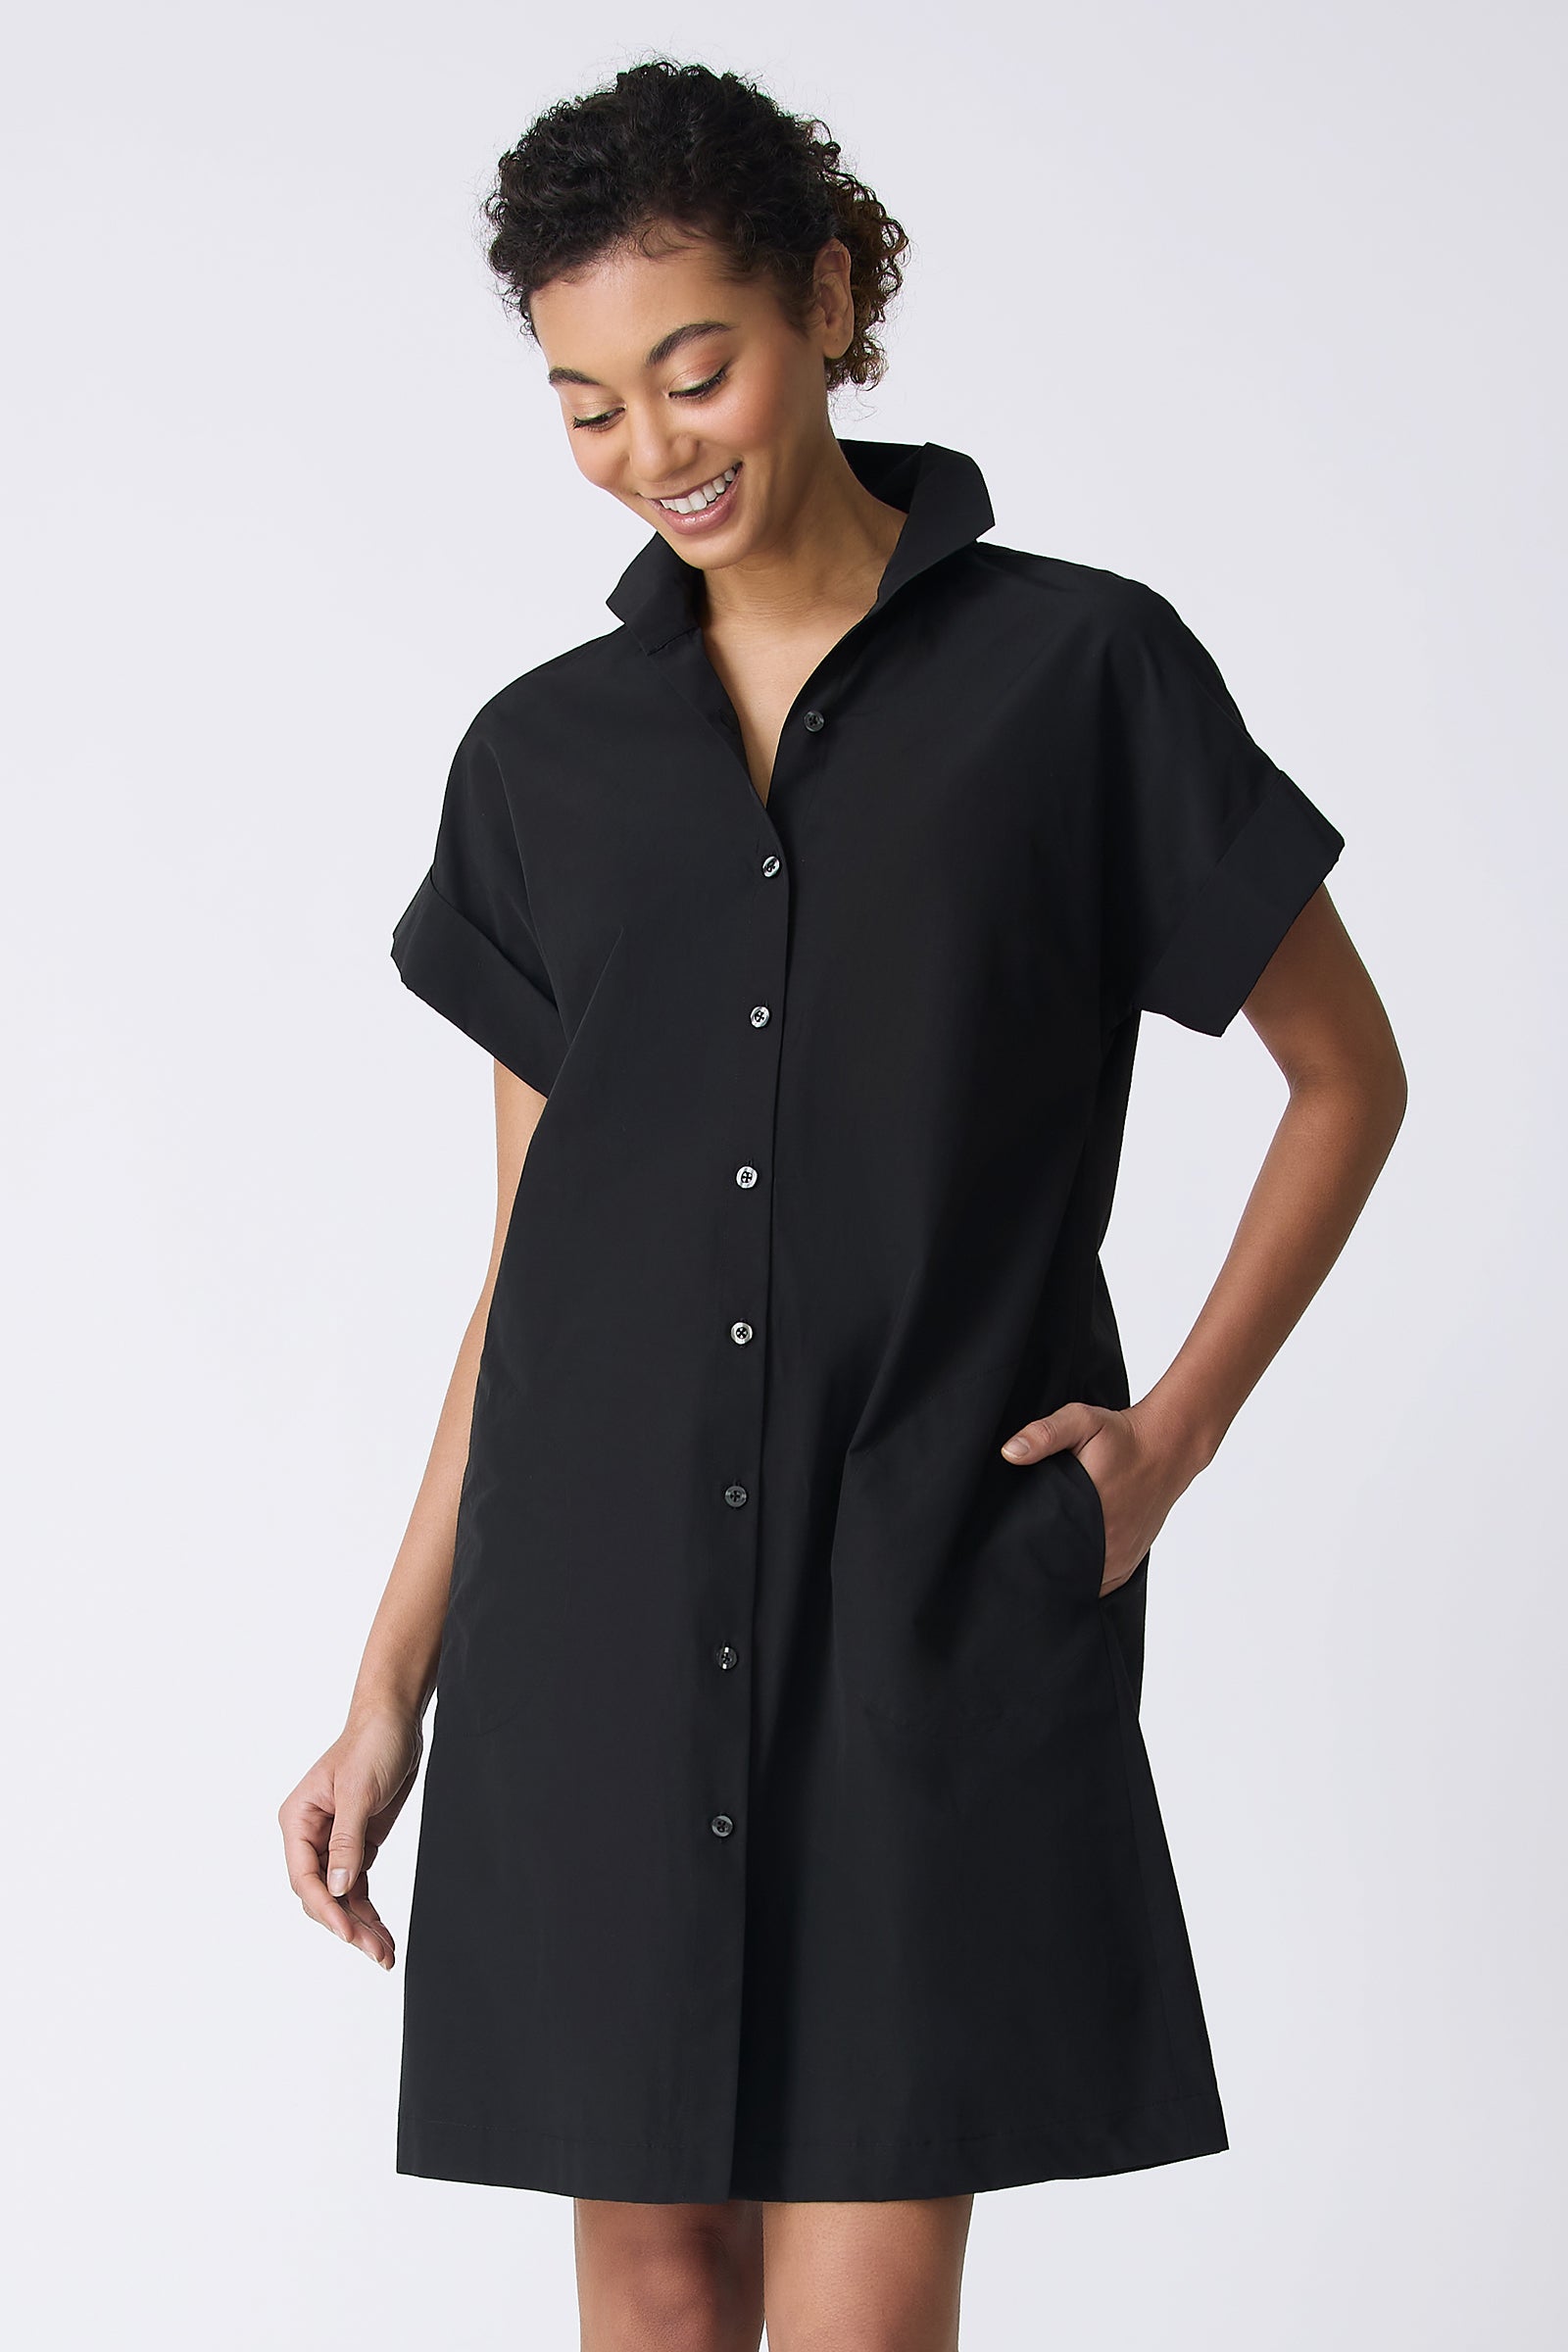 Kal Rieman Holly Kimono Dress in Black on model looking down front view